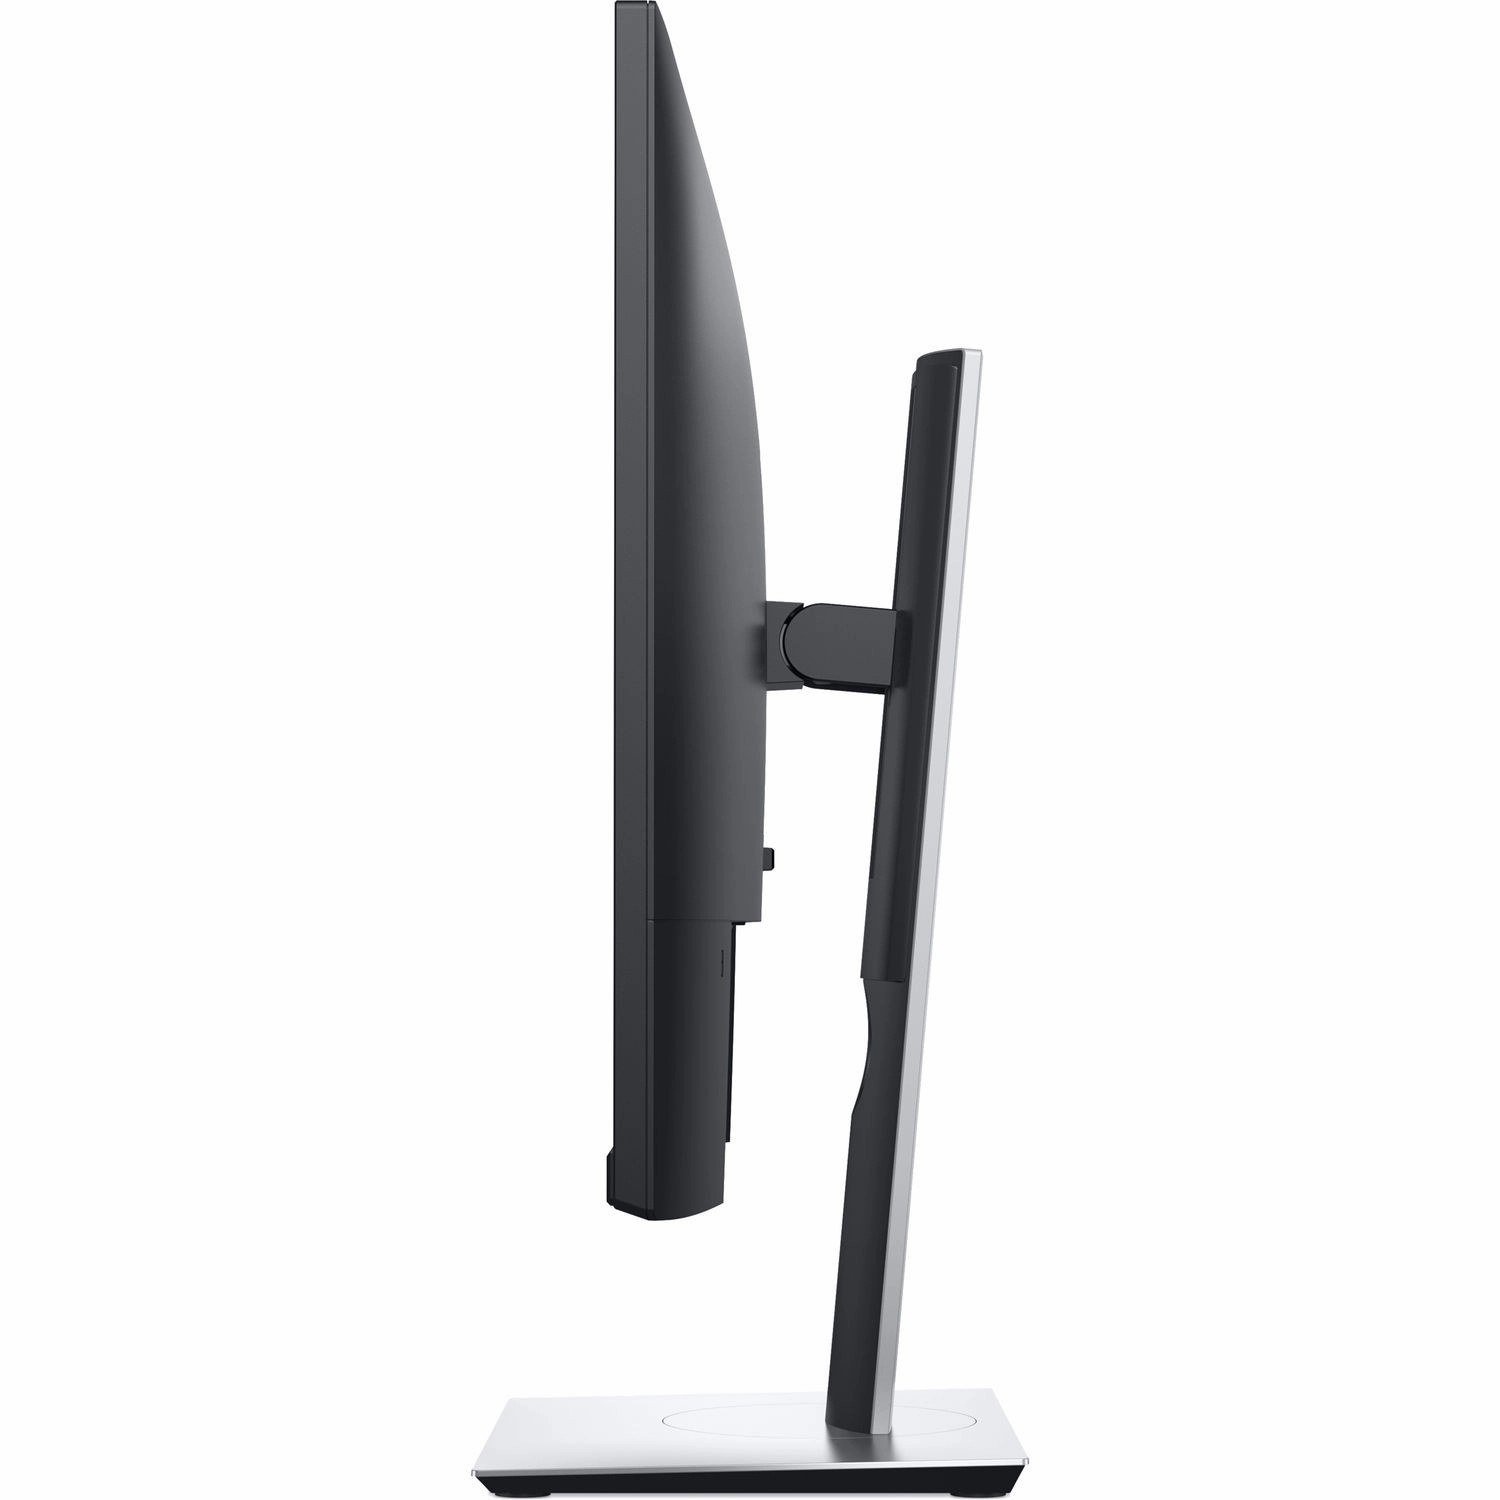 LG 24MP88HV-S 24-Inch IPS Slim LED Monitor : : Computers &  Accessories